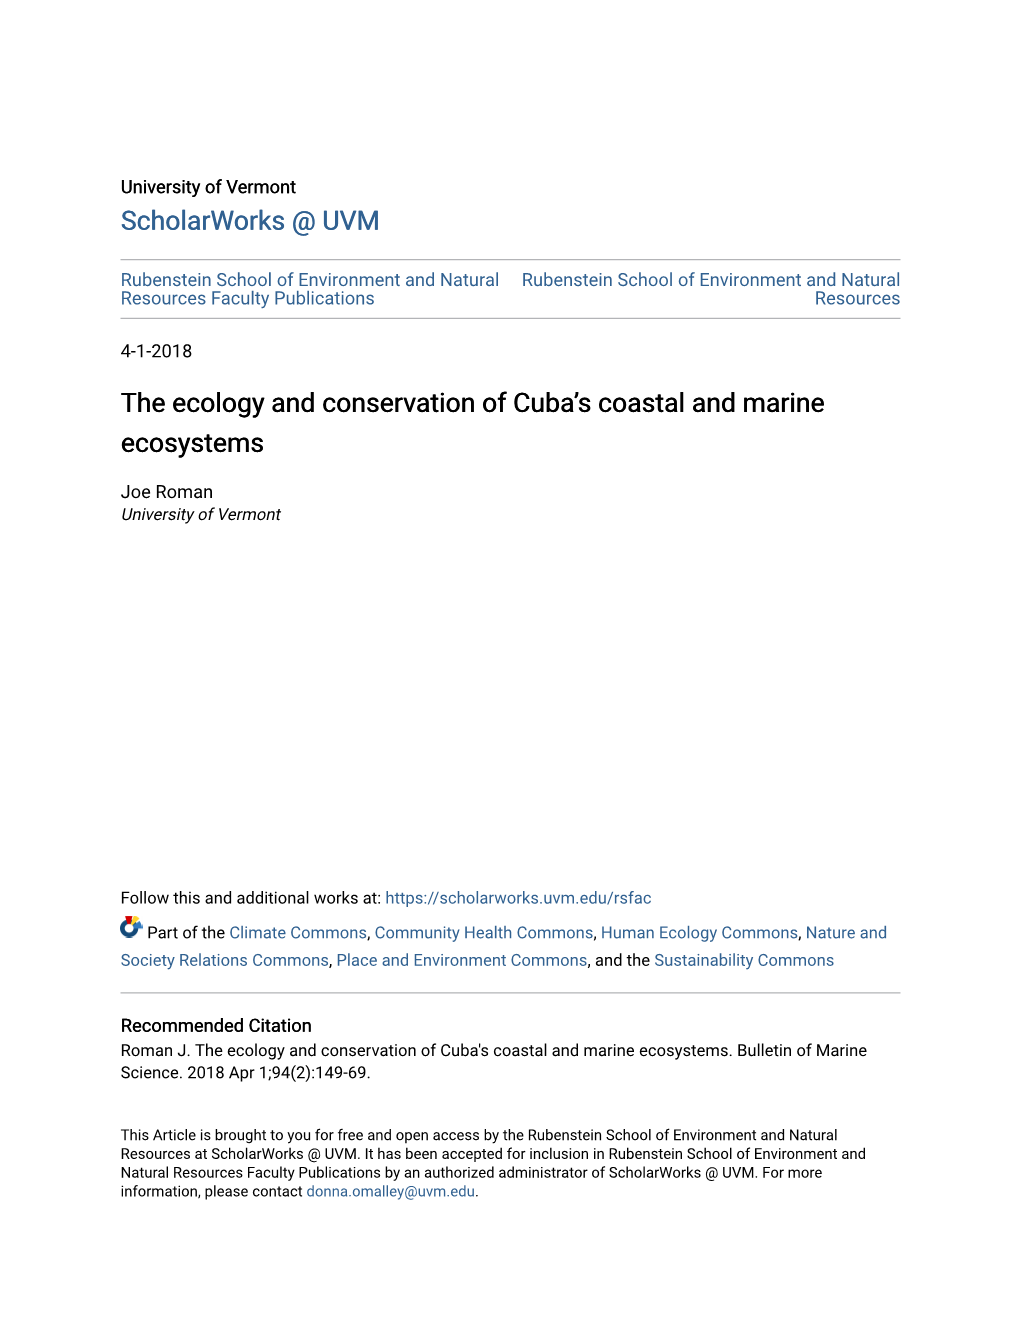 The Ecology and Conservation of Cuba's Coastal and Marine Ecosystems